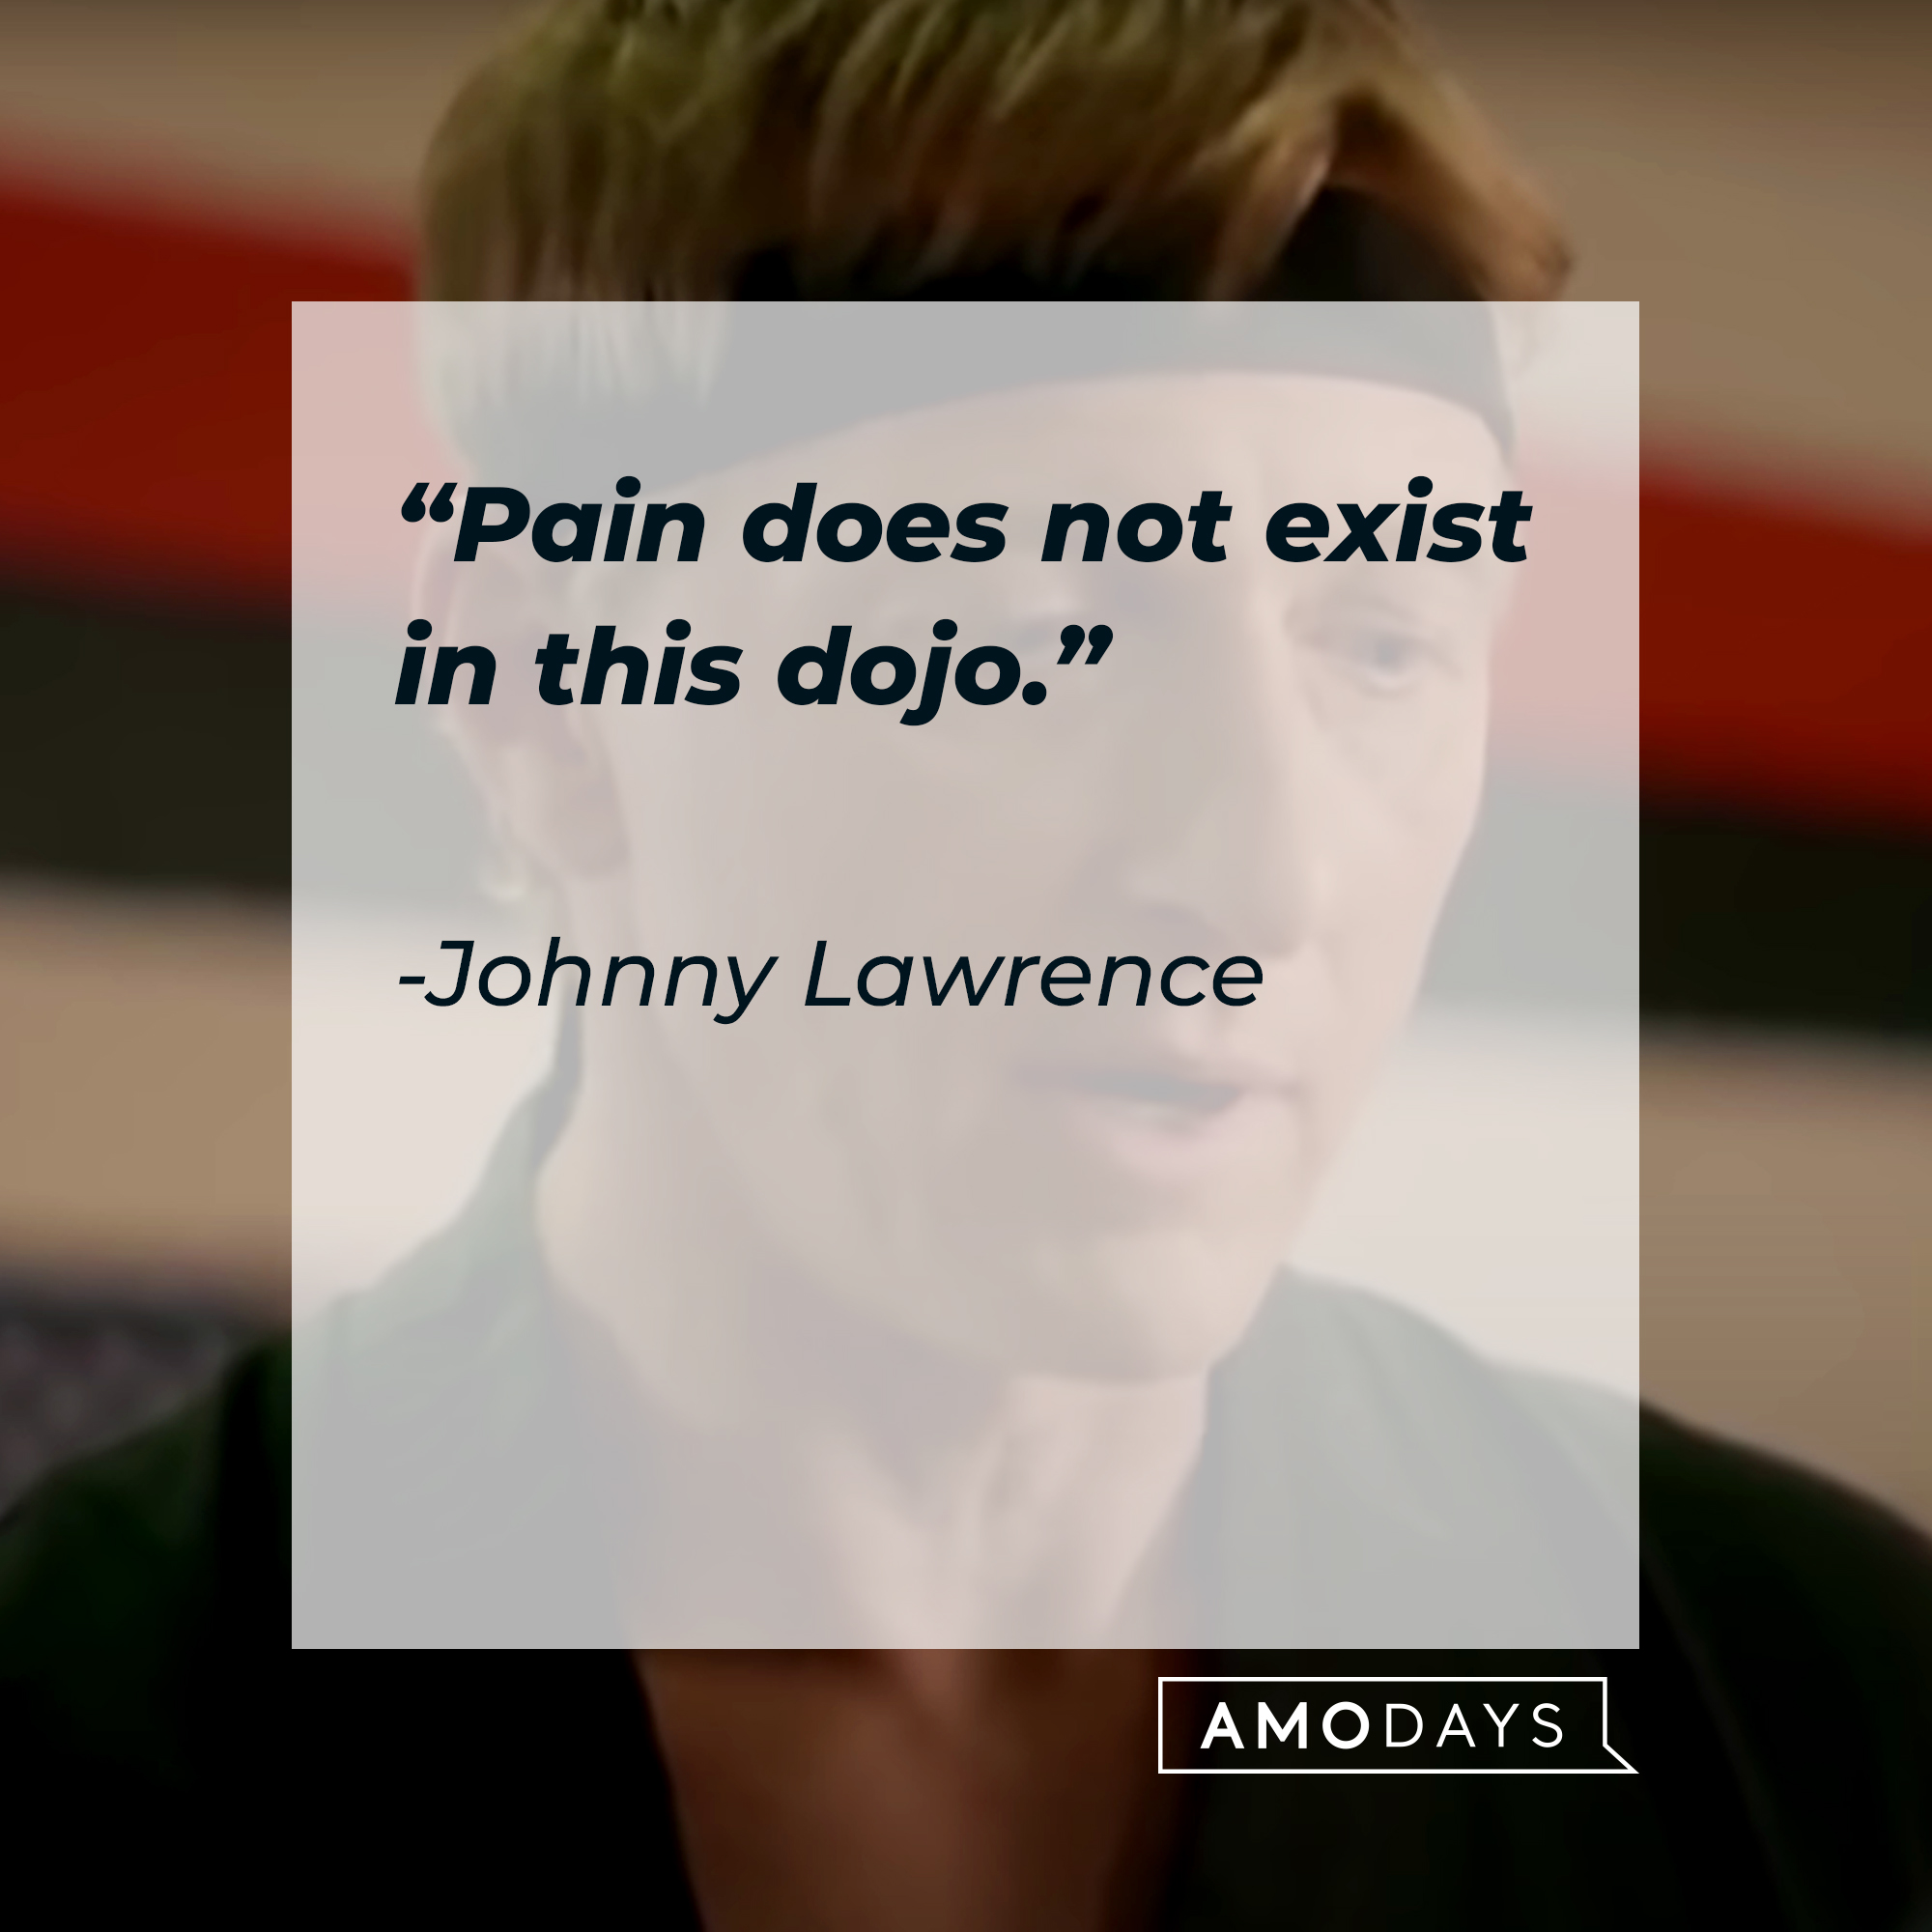 Johnny Lawrence, with his quote: “Pain does not exist in this dojo.” | Source: facebook.com/CobraKaiSeries